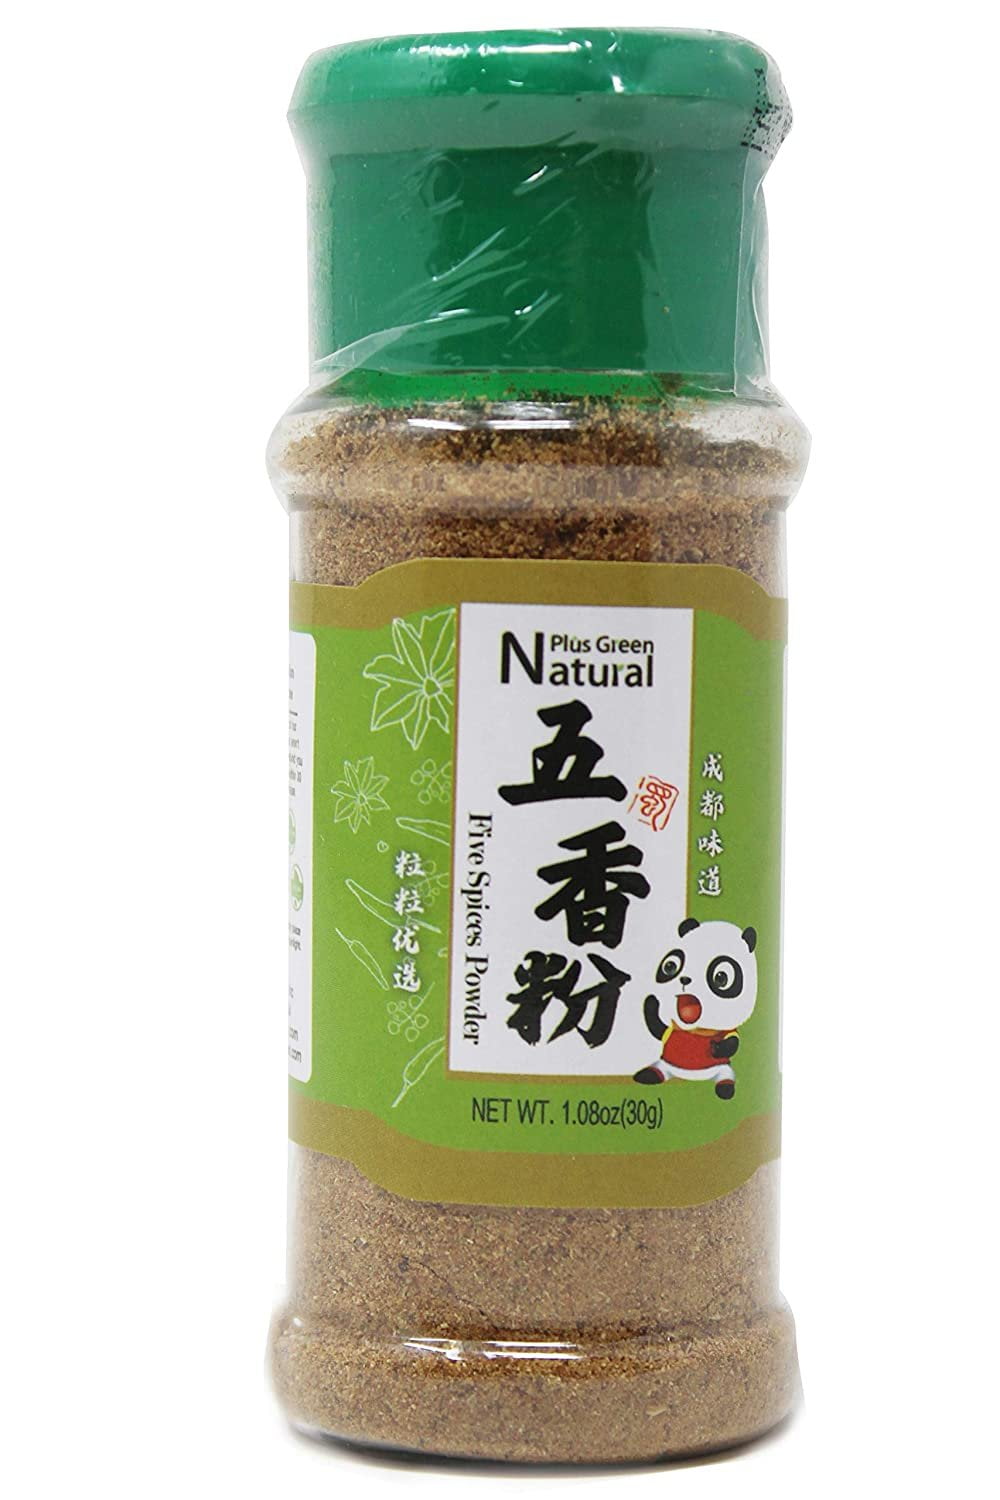 Authentic Chinese Five Spice Blend 1.05 oz, Gluten Free, All Natural Ground  Chinese 5 Spice Powder, No Preservatives No MSG, Mixed Spice Seasoning for